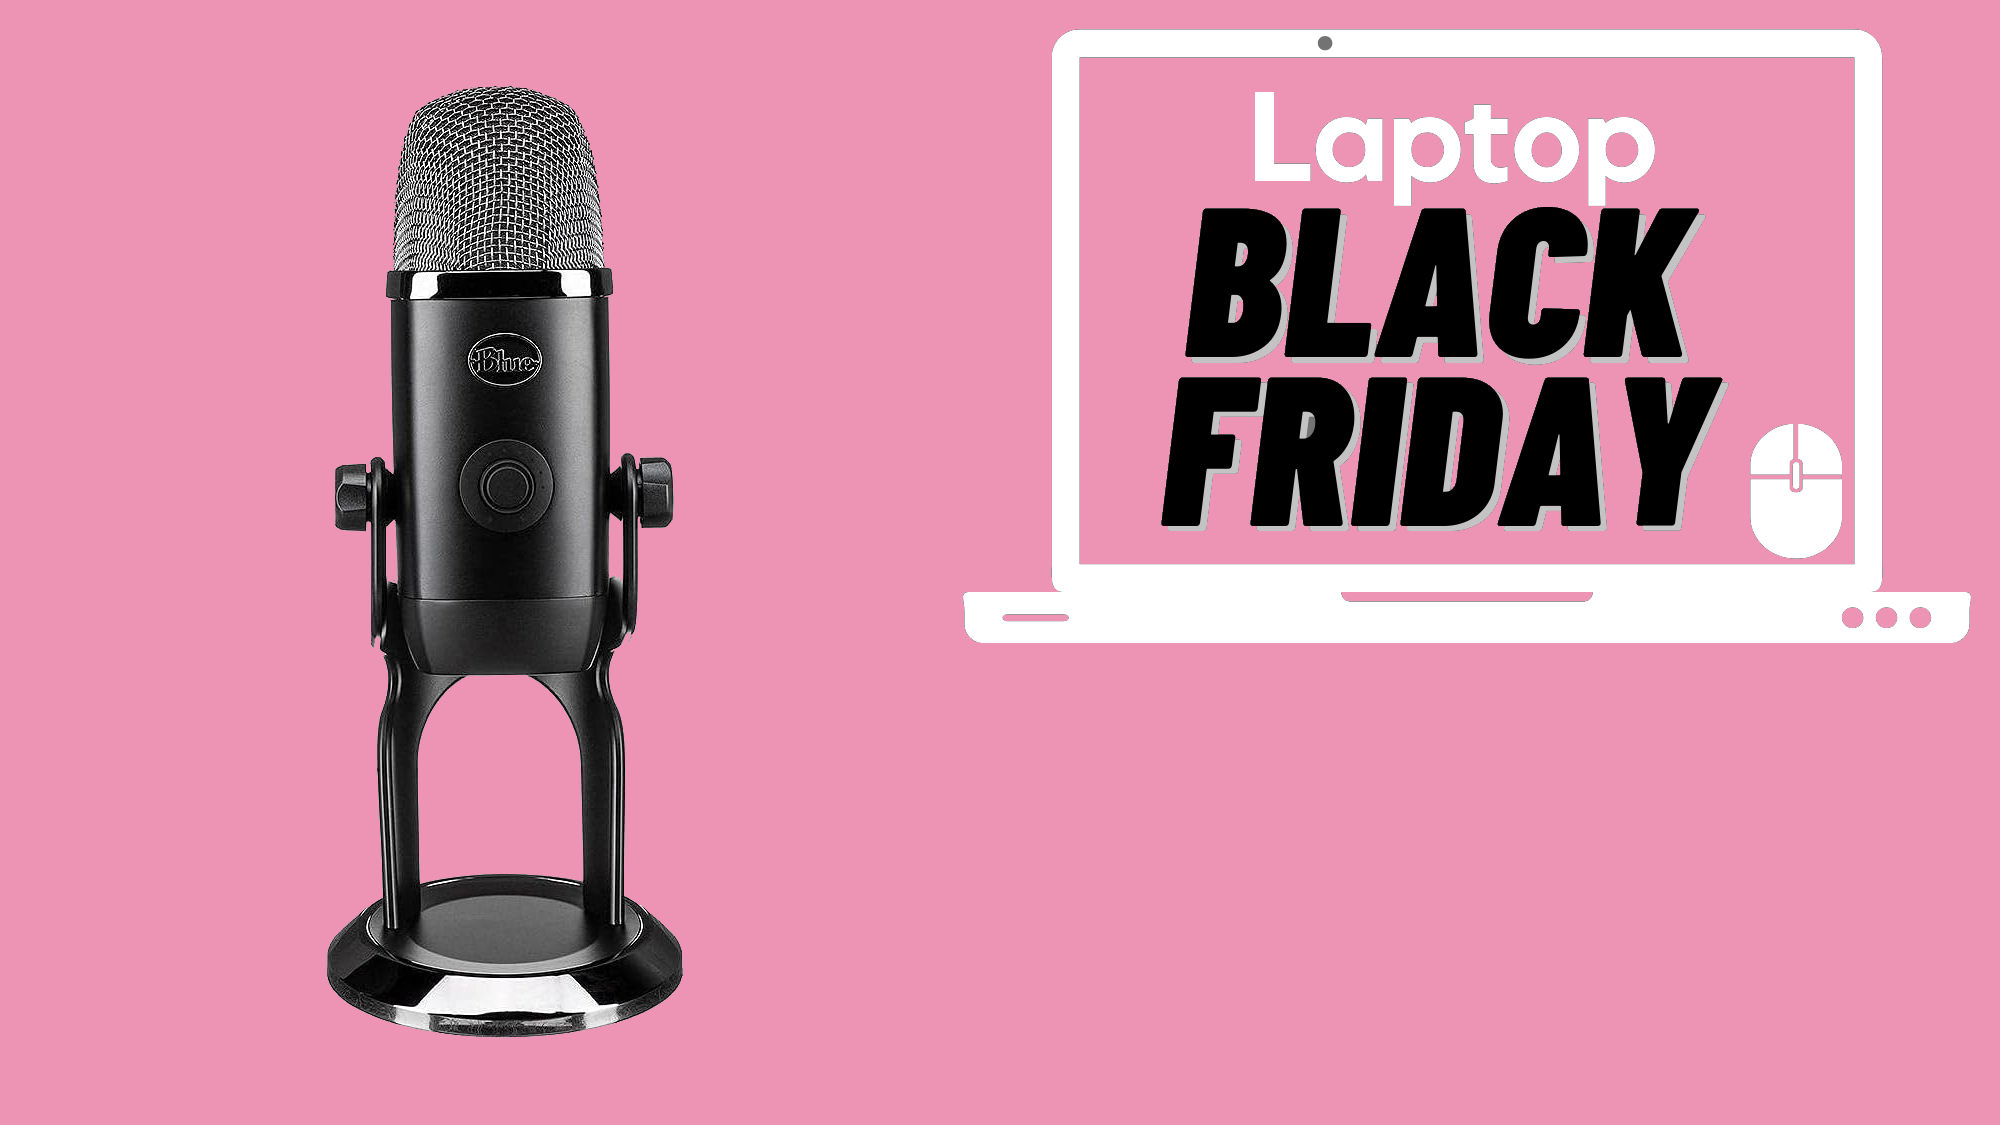 Blue Yeti Microphones are up to 25% off during Black Friday